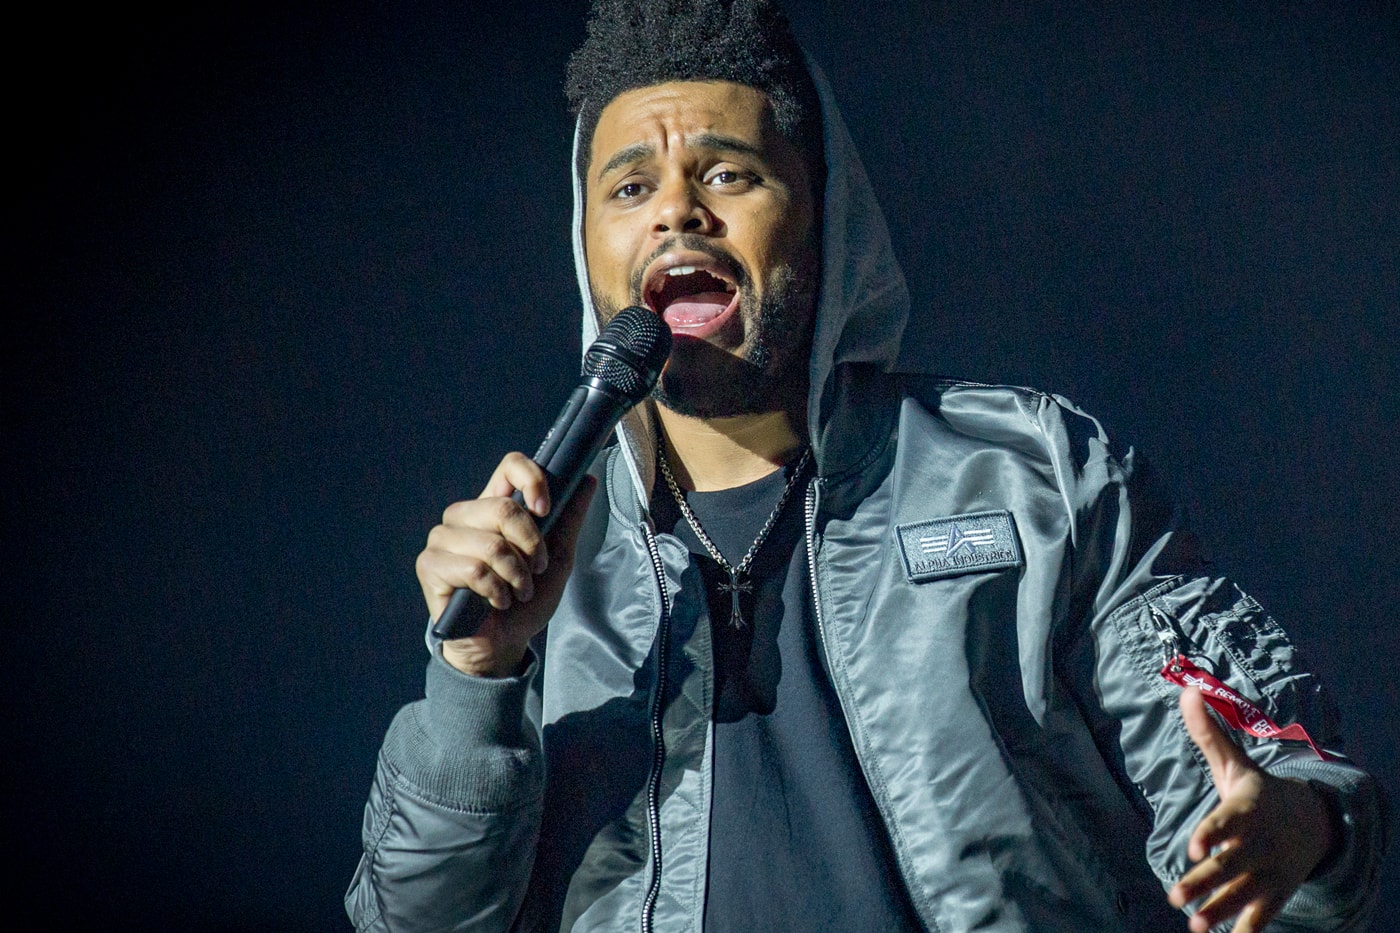 the-weeknd-daft-punk-are-working-on-music-together